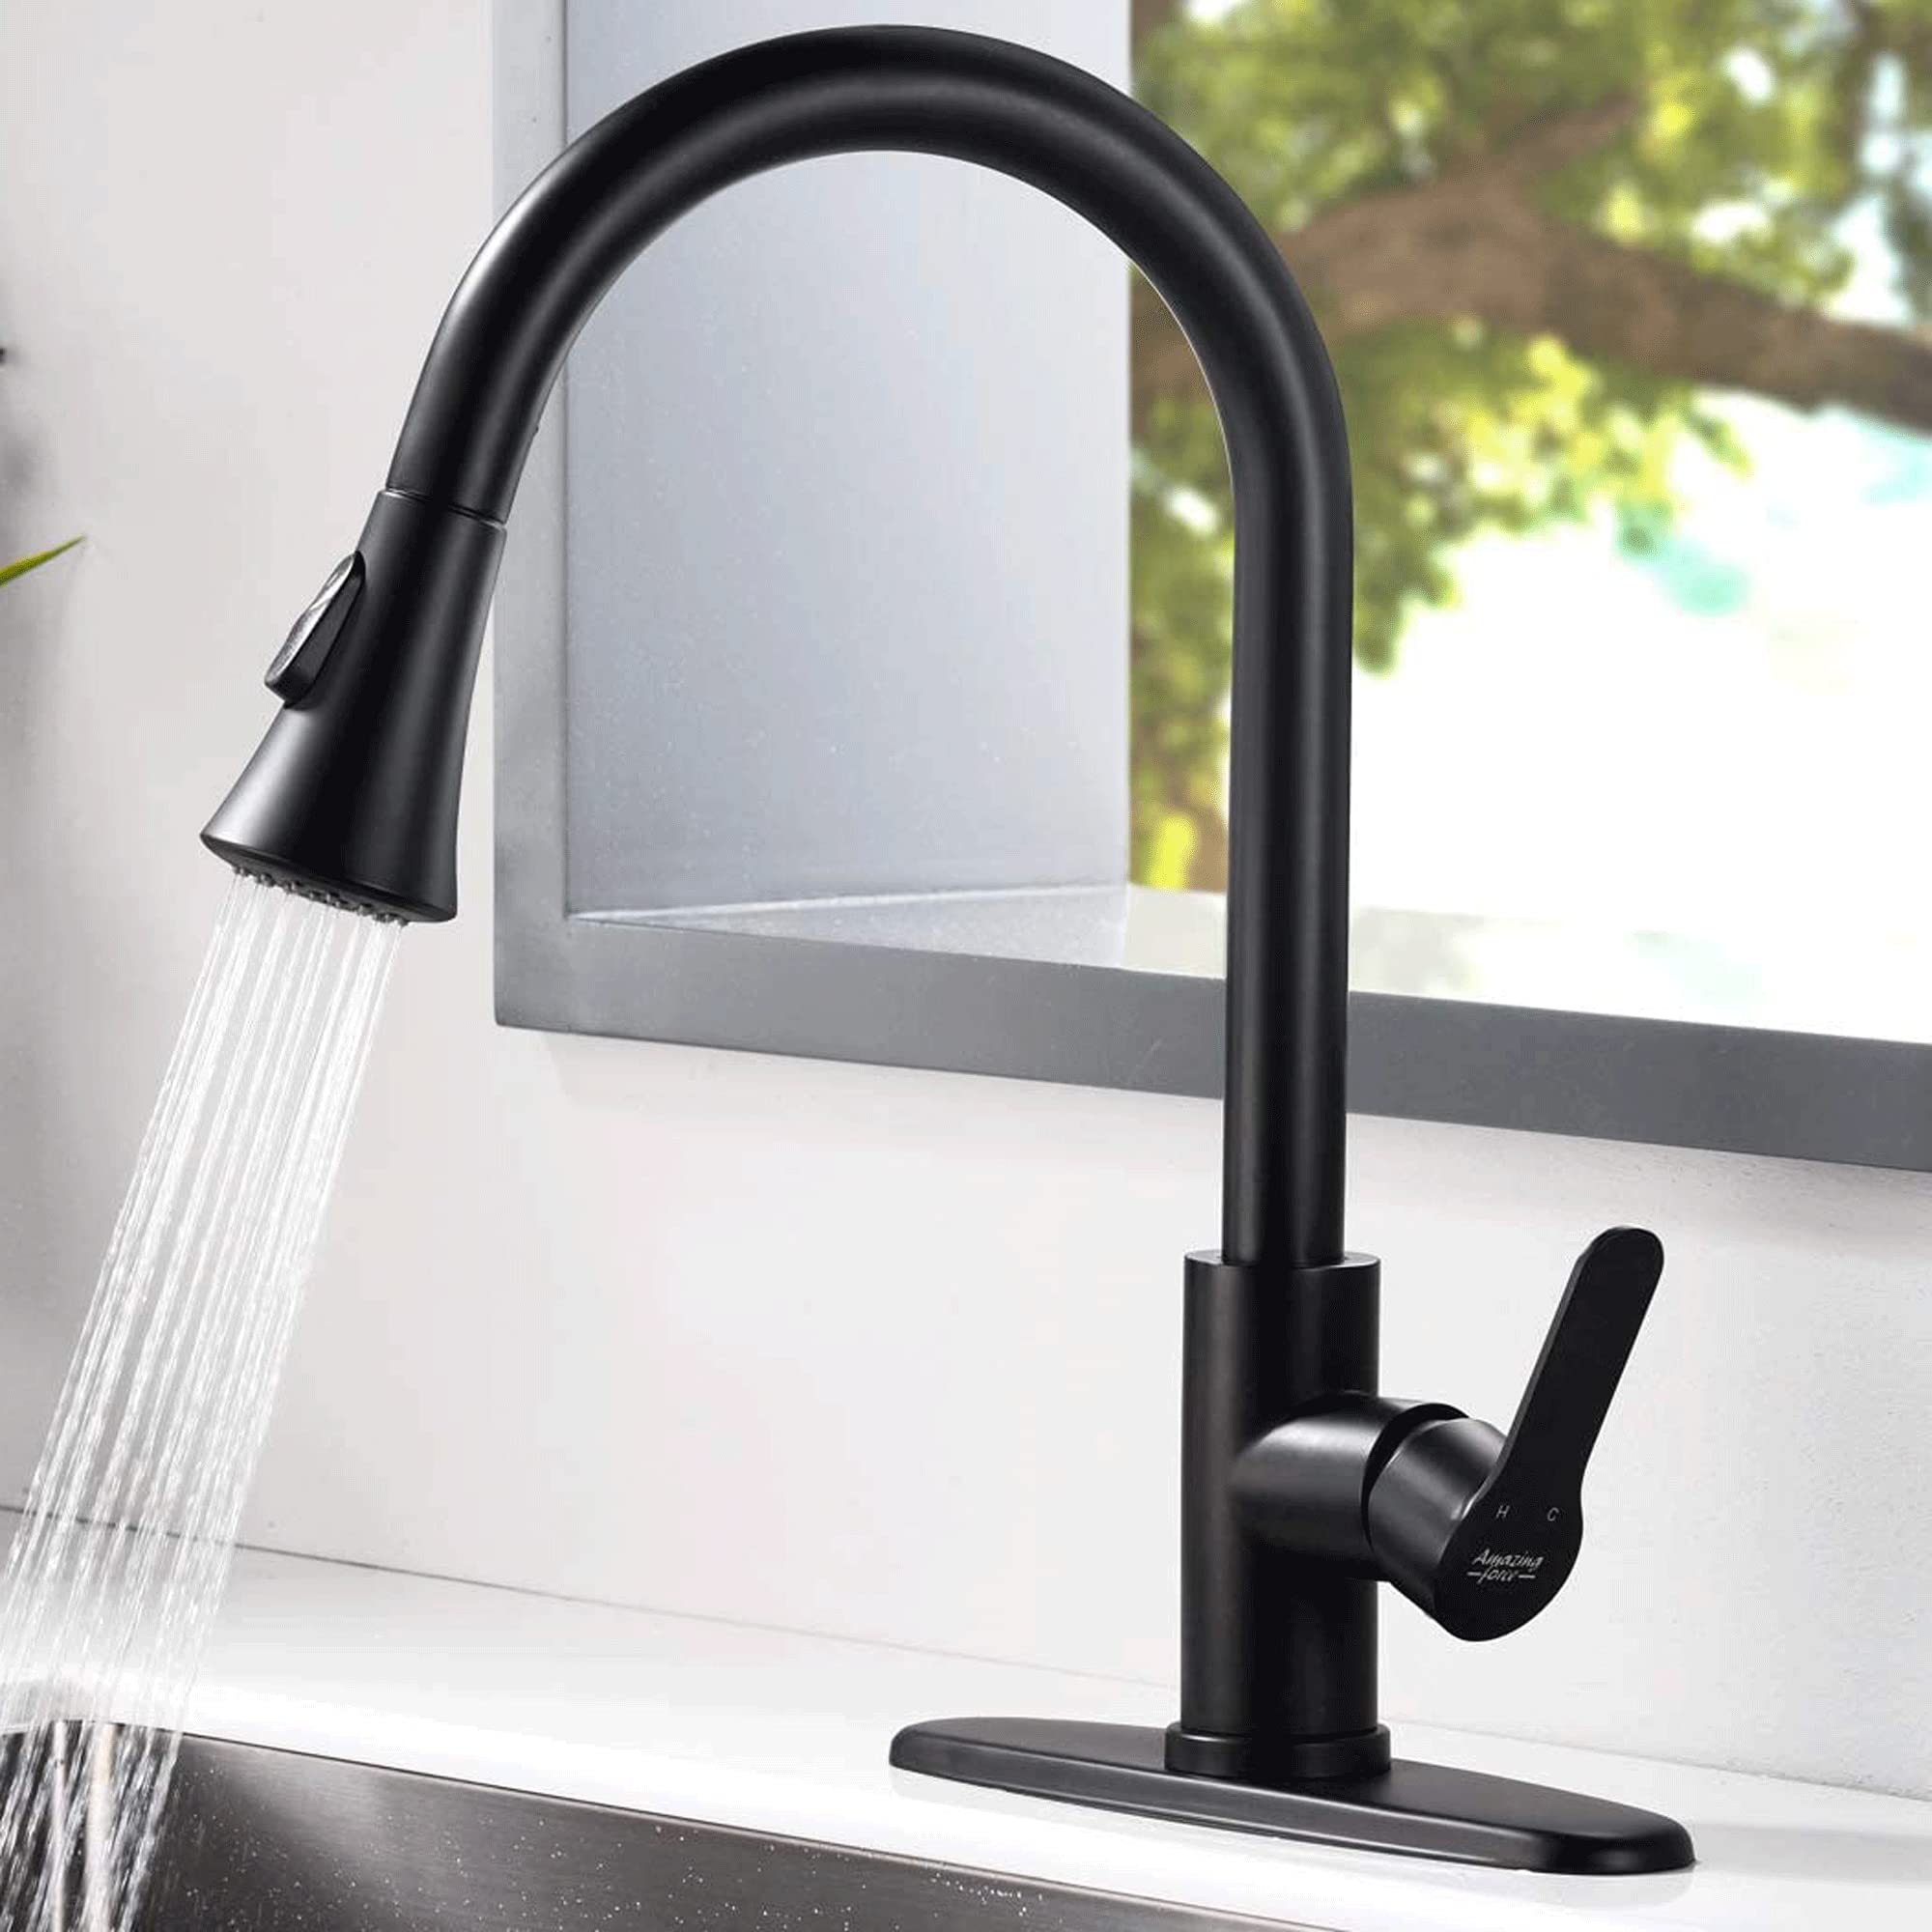 AMAZING FORCE Matte Black Kitchen Faucet Pull Down Kitchen Faucets Stainless Steel Kitchen Faucet with Pull Down Sprayer Modern Single Handle Kitch...